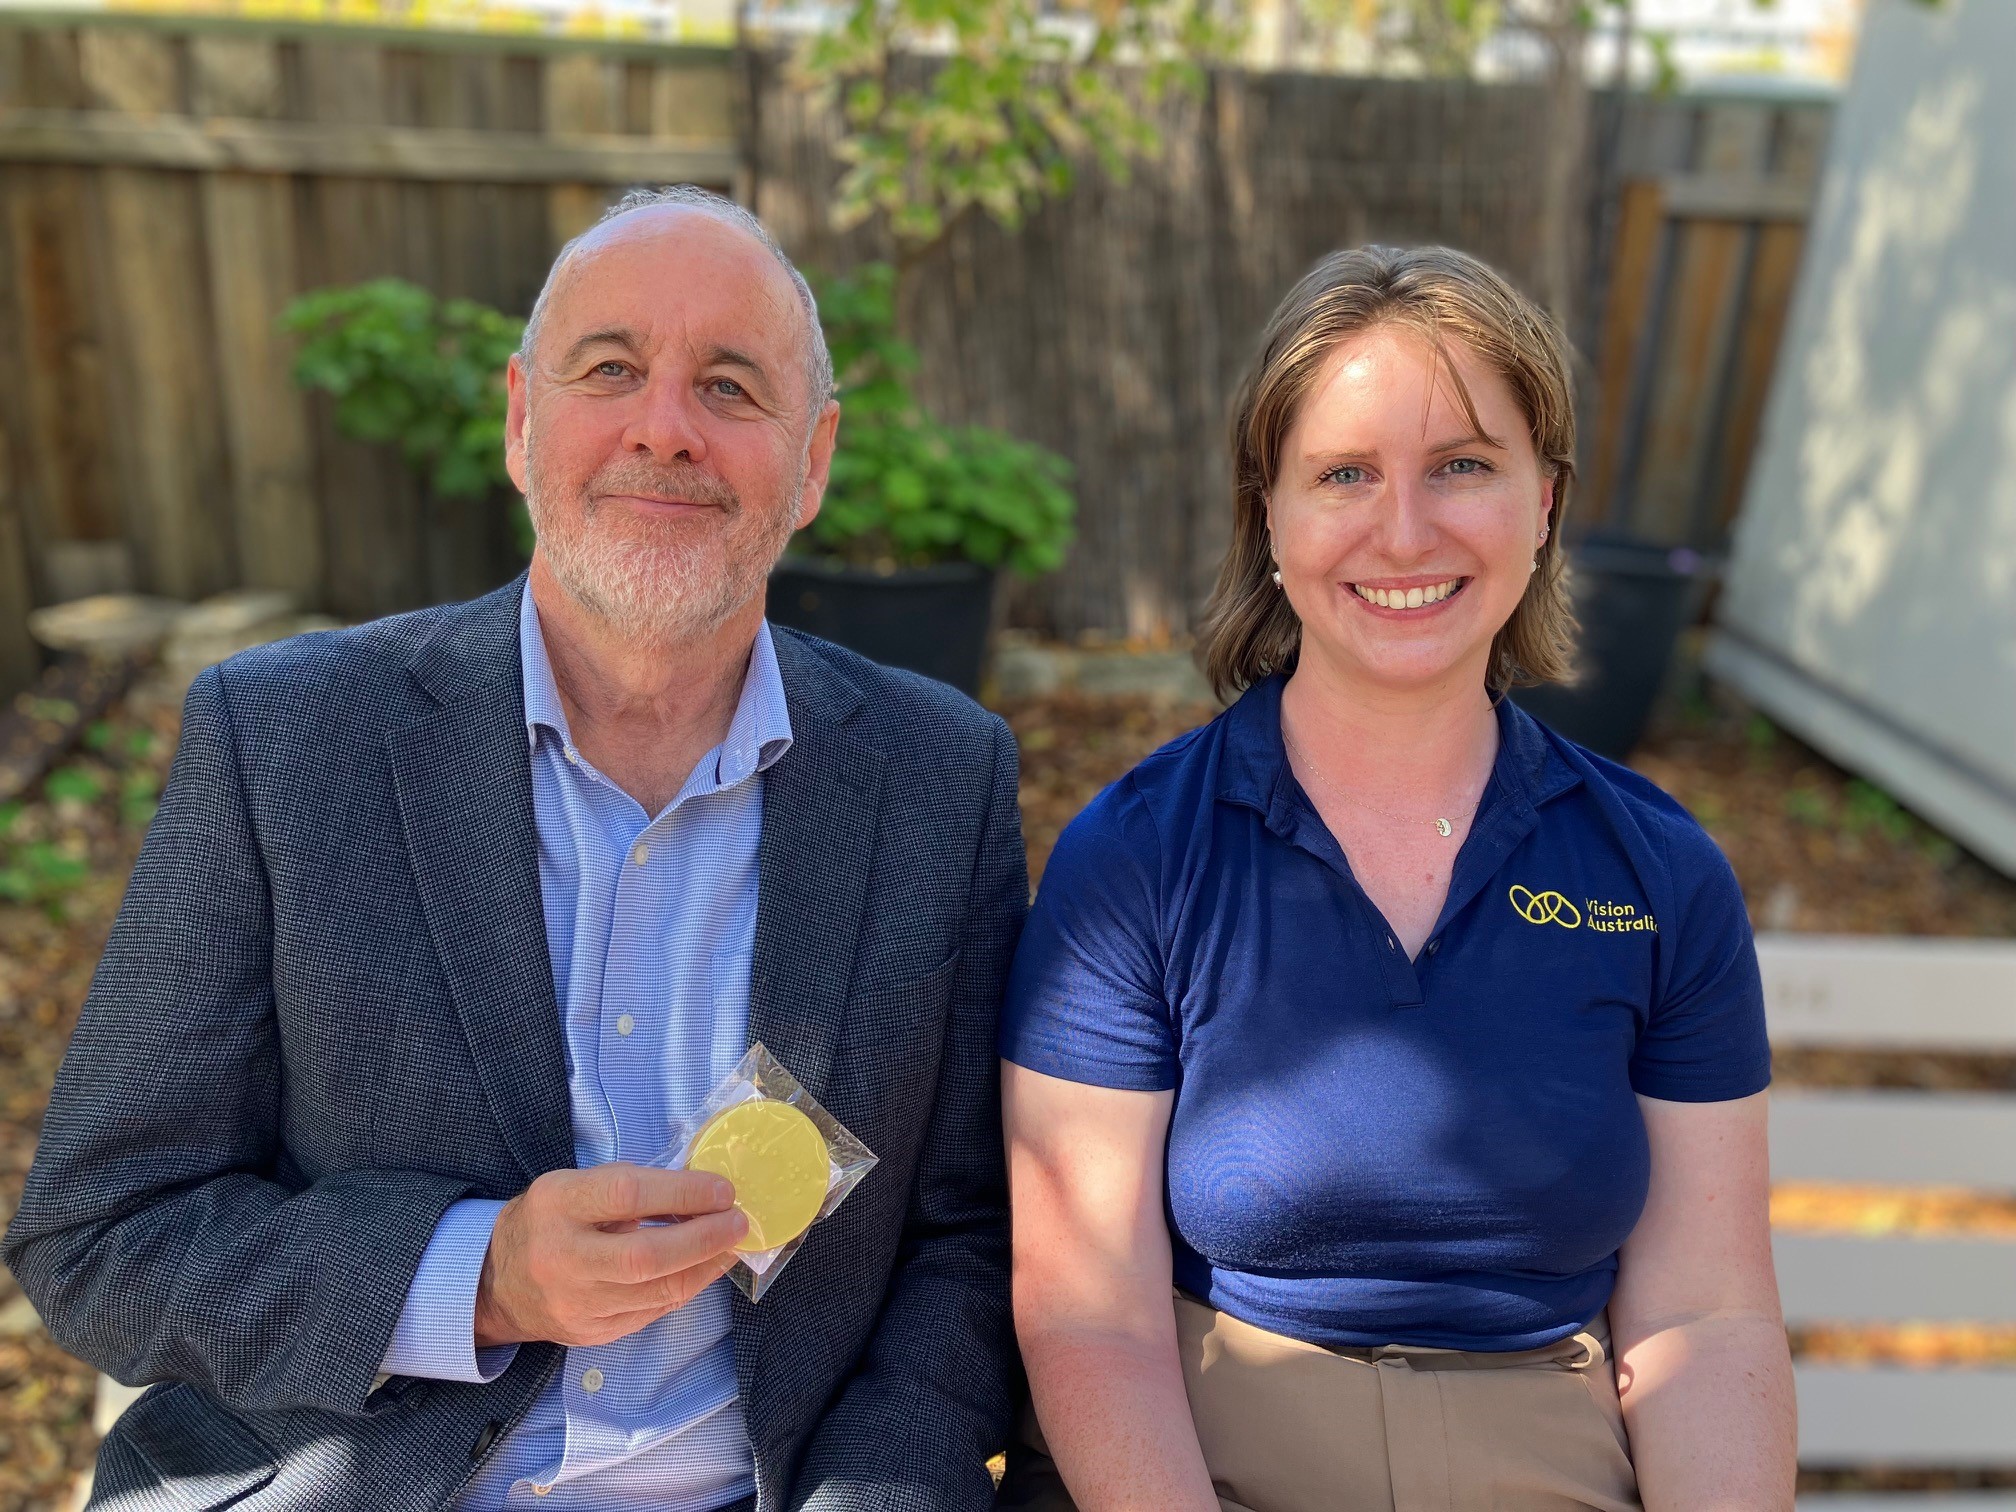 CEO Ron Hooton and Regional Client Services Manager Cara Patterson sit side by side. Ron is wearing a dark blue suit with blue top, Cara has shoulder-length brown hair and is wearing a blue Vision Australia polo t-shirt